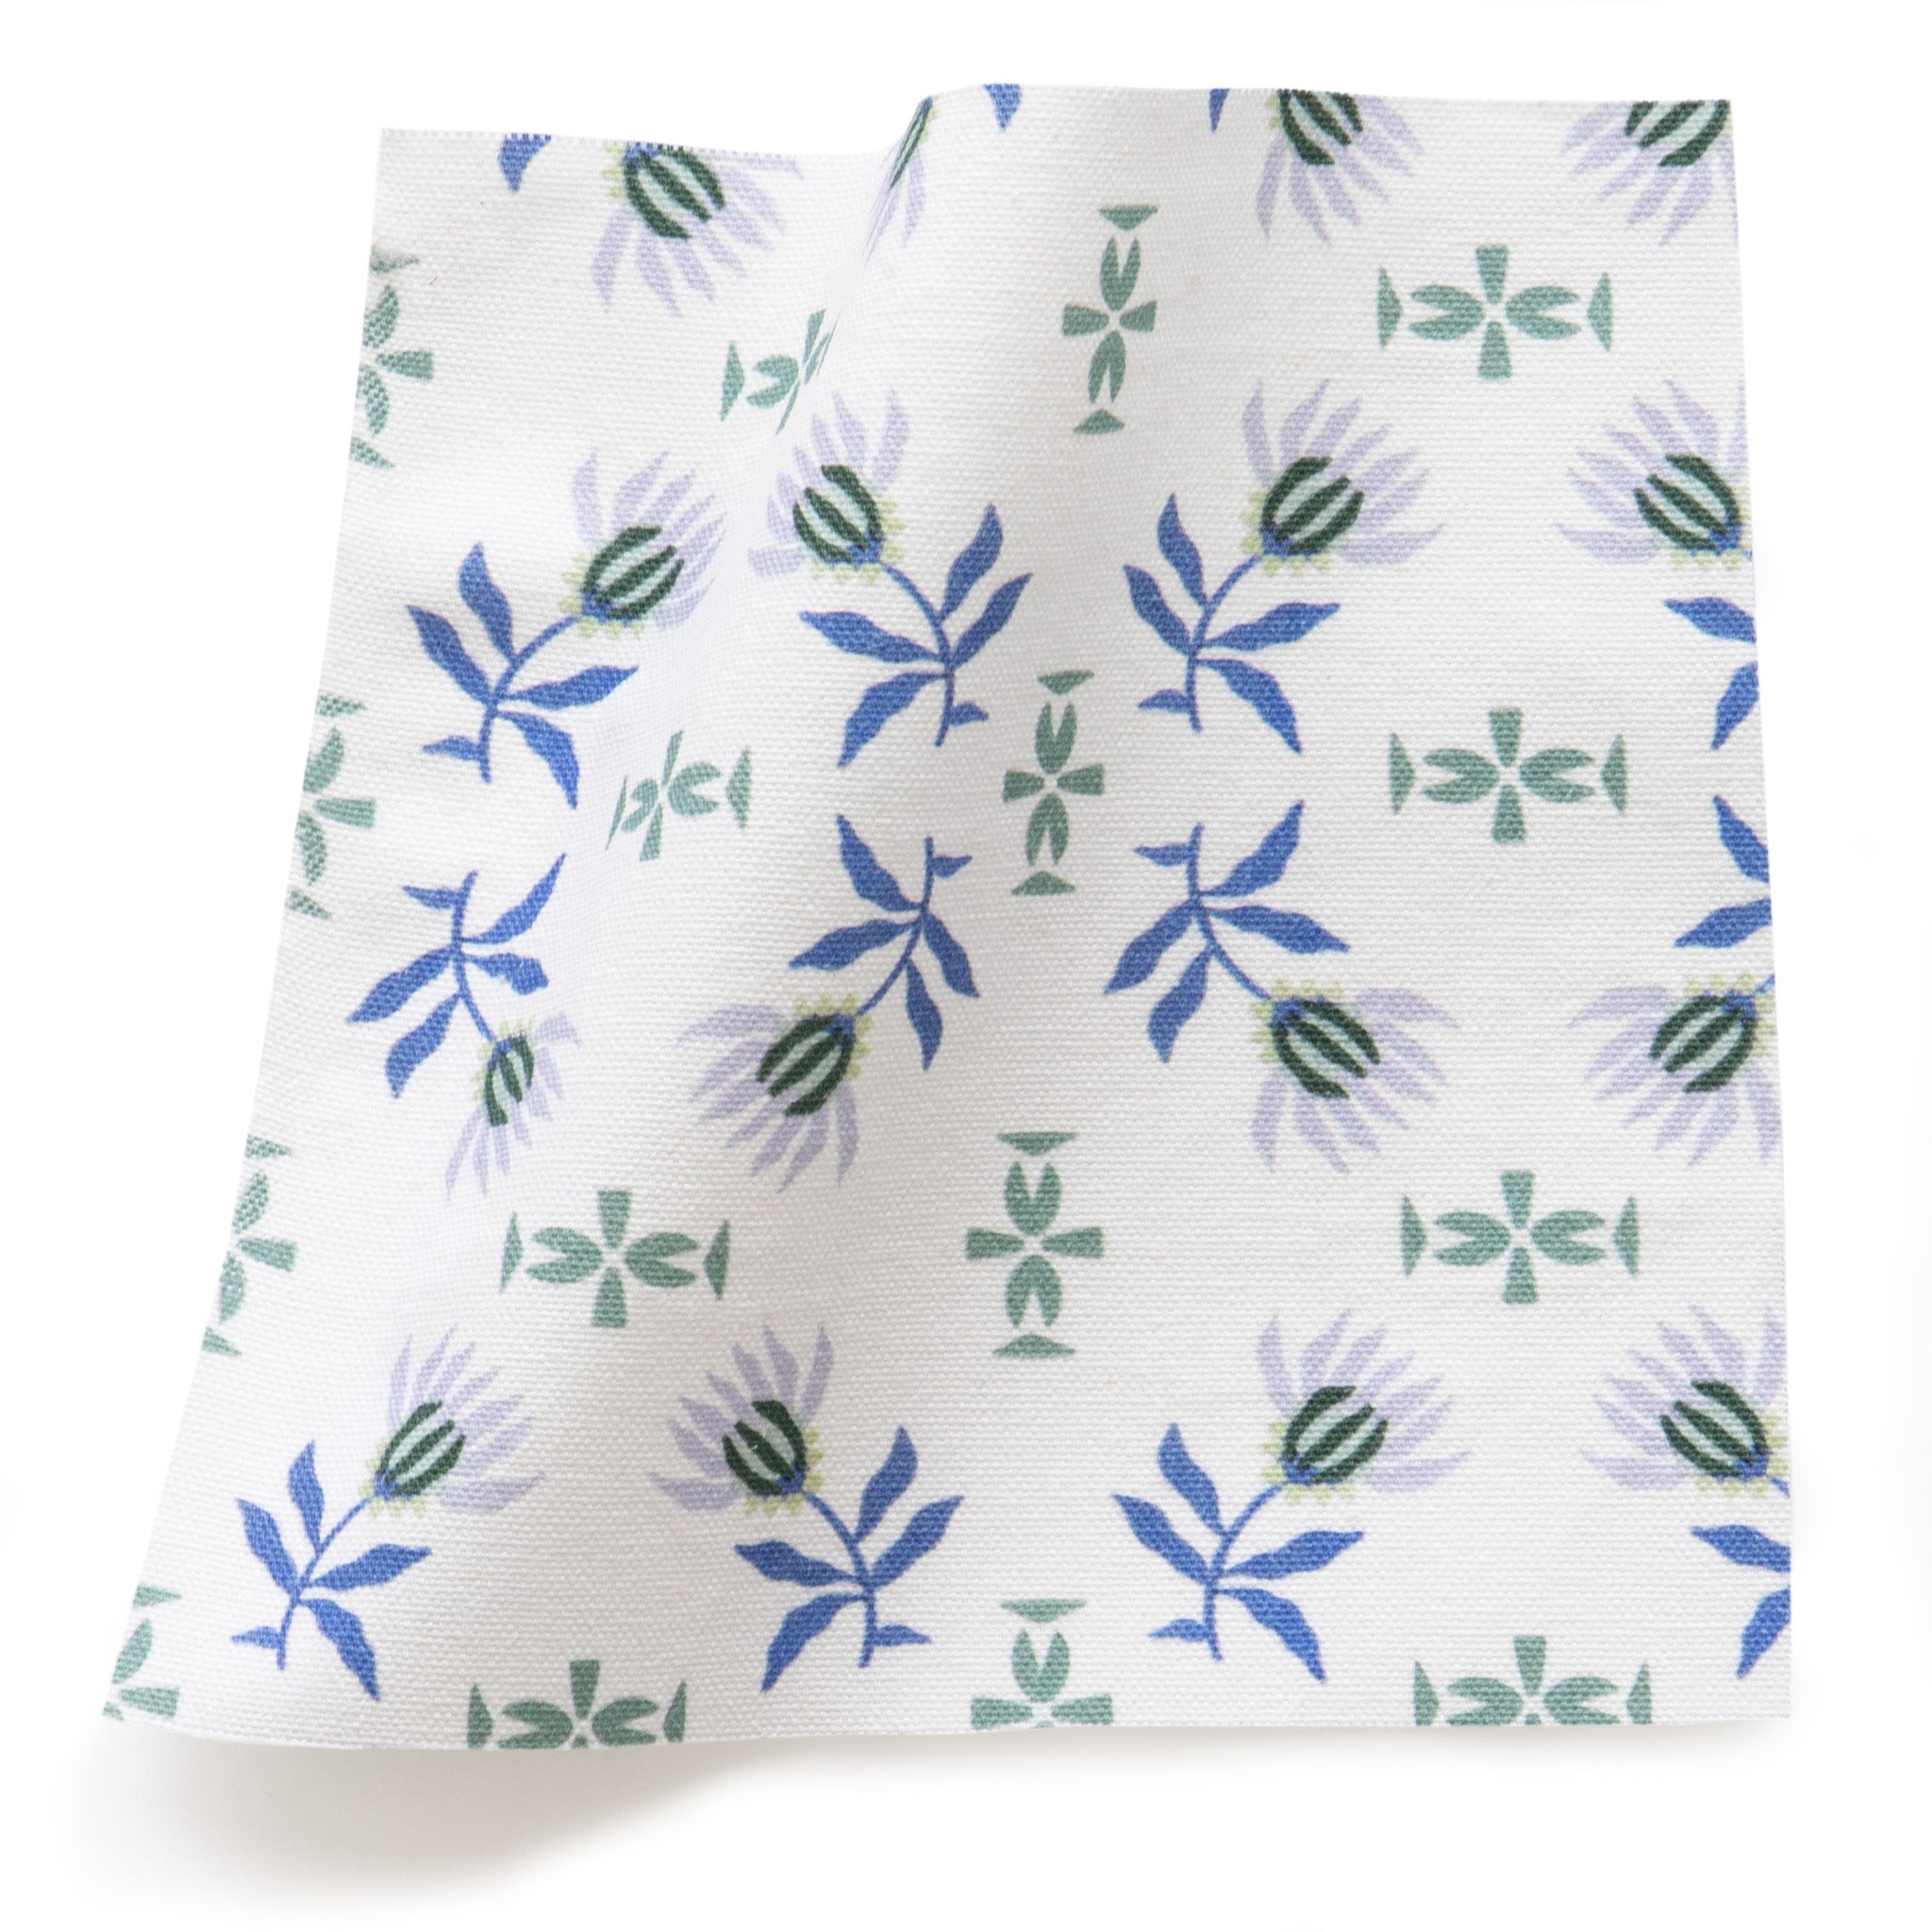 Blue and green printed cotton fabric swatch